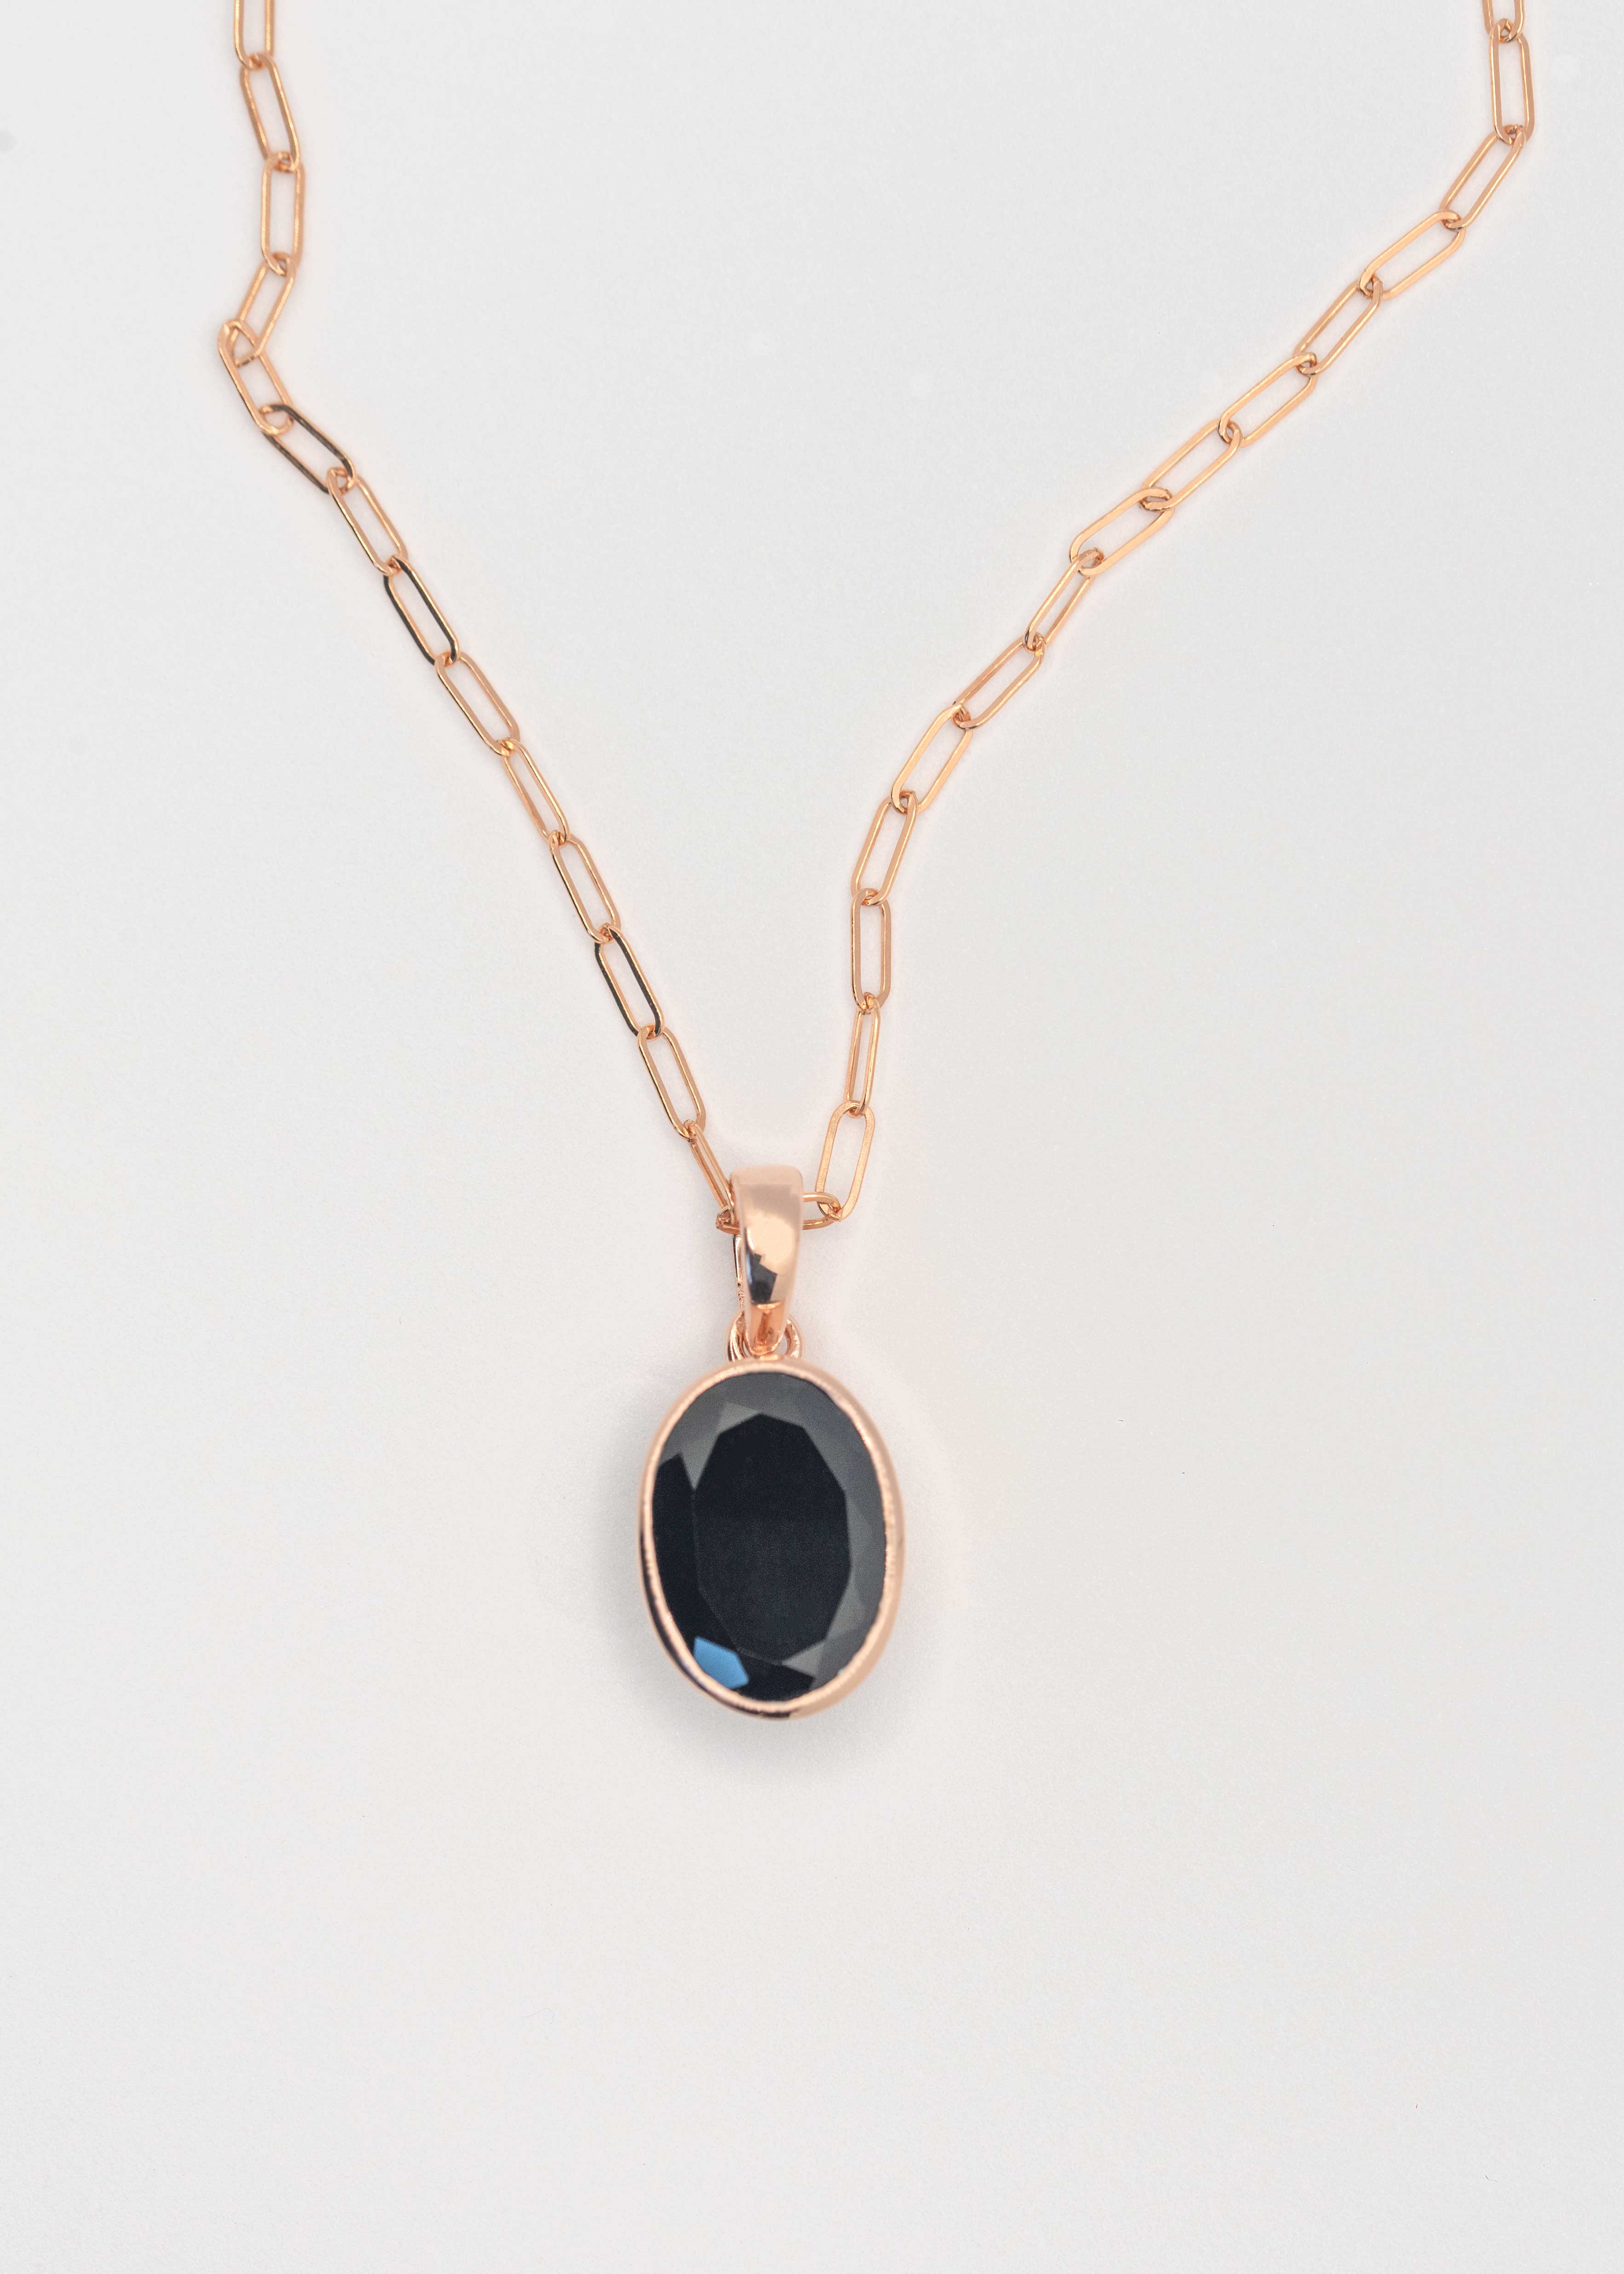 Black Onyx Pendant Necklace oval womens gifts rose gold